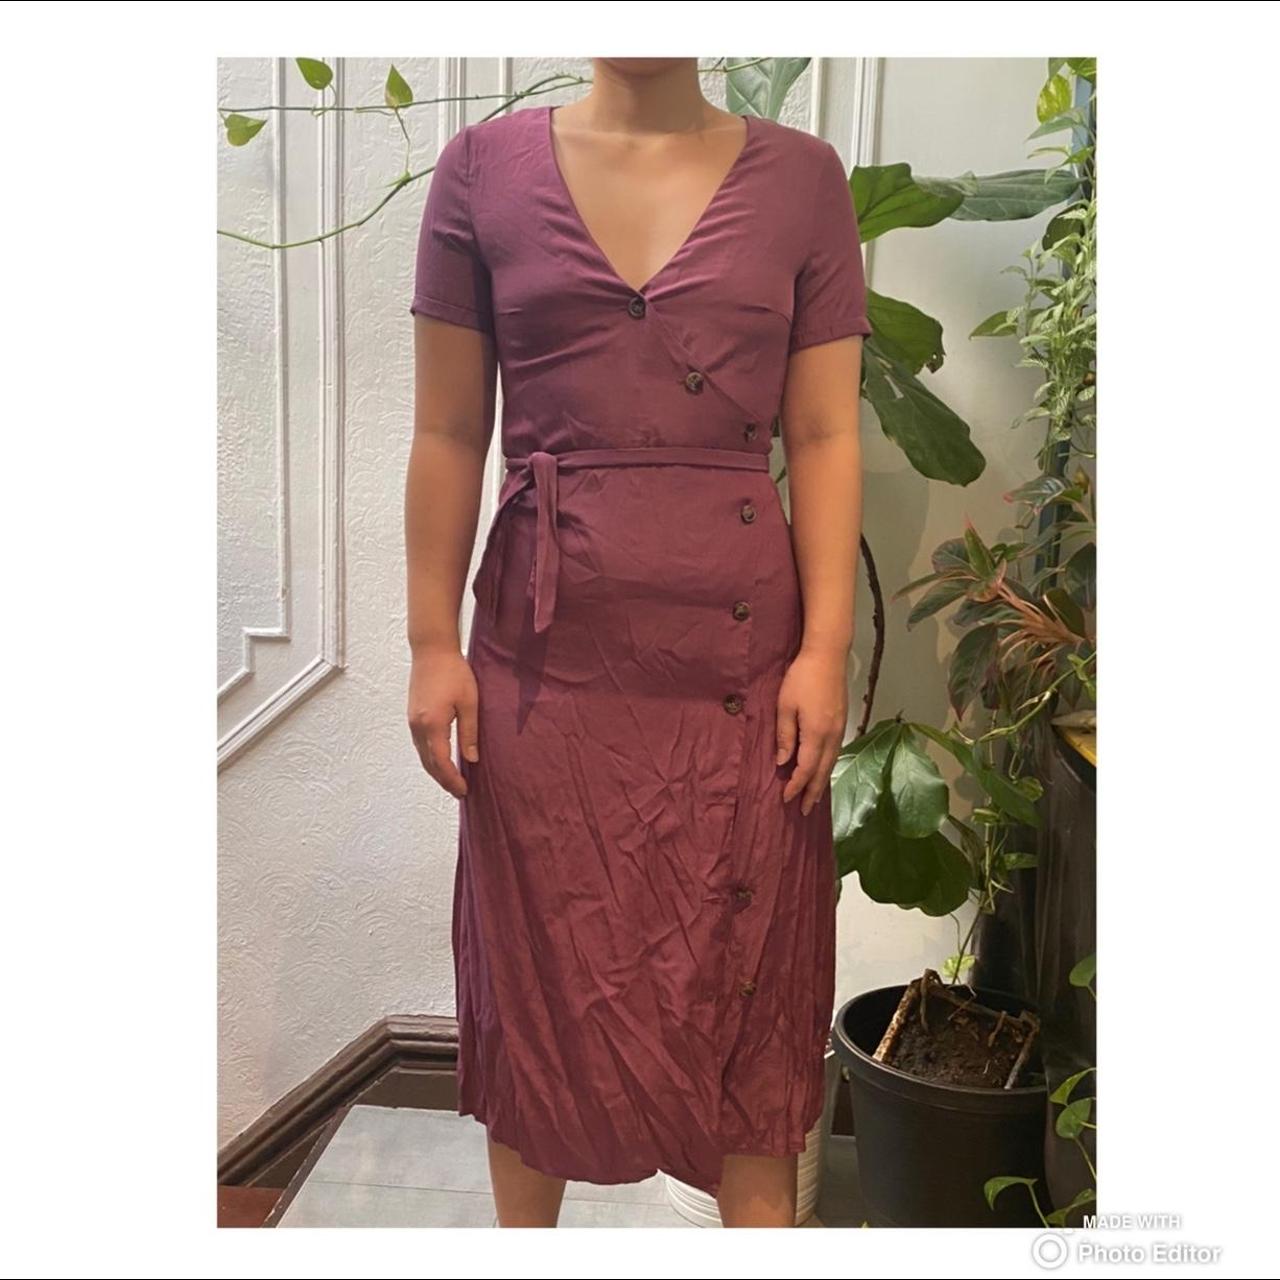 Light purple wrap dress 
</p>
<div class='sfsiaftrpstwpr'><div class='sfsi_responsive_icons' style='display:block;margin-top:10px; margin-bottom: 10px; width:100%' data-icon-width-type='Fully responsive' data-icon-width-size='240' data-edge-type='Round' data-edge-radius='5'  ><div class='sfsi_icons_container sfsi_responsive_without_counter_icons sfsi_medium_button_container sfsi_icons_container_box_fully_container ' style='width:100%;display:flex; text-align:center;' ><a target='_blank' href='https://www.facebook.com/sharer/sharer.php?u=https%3A%2F%2Fwww.dresses2022.com%2Flight-purple-wrap-dress%2F' style='display:block;text-align:center;margin-left:10px;  flex-basis:100%;' class=sfsi_responsive_fluid ><div class='sfsi_responsive_icon_item_container sfsi_responsive_icon_facebook_container sfsi_medium_button sfsi_responsive_icon_gradient sfsi_centered_icon' style=' border-radius:5px; width:auto; ' ><img style='max-height: 25px;display:unset;margin:0' class='sfsi_wicon' alt='facebook' src='https://www.dresses2022.com/wp-content/plugins/ultimate-social-media-icons/images/responsive-icon/facebook.svg'><span style='color:#fff'>Share on Facebook</span></div></a><a target='_blank' href='https://twitter.com/intent/tweet?text=Hey%2C+check+out+this+cool+site+I+found%3A+www.yourname.com+%23Topic+via%40my_twitter_name&url=https%3A%2F%2Fwww.dresses2022.com%2Flight-purple-wrap-dress%2F' style='display:block;text-align:center;margin-left:10px;  flex-basis:100%;' class=sfsi_responsive_fluid ><div class='sfsi_responsive_icon_item_container sfsi_responsive_icon_twitter_container sfsi_medium_button sfsi_responsive_icon_gradient sfsi_centered_icon' style=' border-radius:5px; width:auto; ' ><img style='max-height: 25px;display:unset;margin:0' class='sfsi_wicon' alt='Twitter' src='https://www.dresses2022.com/wp-content/plugins/ultimate-social-media-icons/images/responsive-icon/Twitter.svg'><span style='color:#fff'>Tweet</span></div></a><a target='_blank' href='https://follow.it/now' style='display:block;text-align:center;margin-left:10px;  flex-basis:100%;' class=sfsi_responsive_fluid ><div class='sfsi_responsive_icon_item_container sfsi_responsive_icon_follow_container sfsi_medium_button sfsi_responsive_icon_gradient sfsi_centered_icon' style=' border-radius:5px; width:auto; ' ><img style='max-height: 25px;display:unset;margin:0' class='sfsi_wicon' alt='Follow' src='https://www.dresses2022.com/wp-content/plugins/ultimate-social-media-icons/images/responsive-icon/Follow.png'><span style='color:#fff'>Follow us</span></div></a><a target='_blank' href='https://www.pinterest.com/pin/create/link/?url=https%3A%2F%2Fwww.dresses2022.com%2Flight-purple-wrap-dress%2F' style='display:block;text-align:center;margin-left:10px;  flex-basis:100%;' class=sfsi_responsive_fluid ><div class='sfsi_responsive_icon_item_container sfsi_responsive_icon_pinterest_container sfsi_medium_button sfsi_responsive_icon_gradient sfsi_centered_icon' style=' border-radius:5px; width:auto; ' ><img style='max-height: 25px;display:unset;margin:0' class='sfsi_wicon' alt='Pinterest' src='https://www.dresses2022.com/wp-content/plugins/ultimate-social-media-icons/images/responsive-icon/Pinterest.svg'><span style='color:#fff'>Save</span></div></a></div></div></div><!--end responsive_icons--><div class=